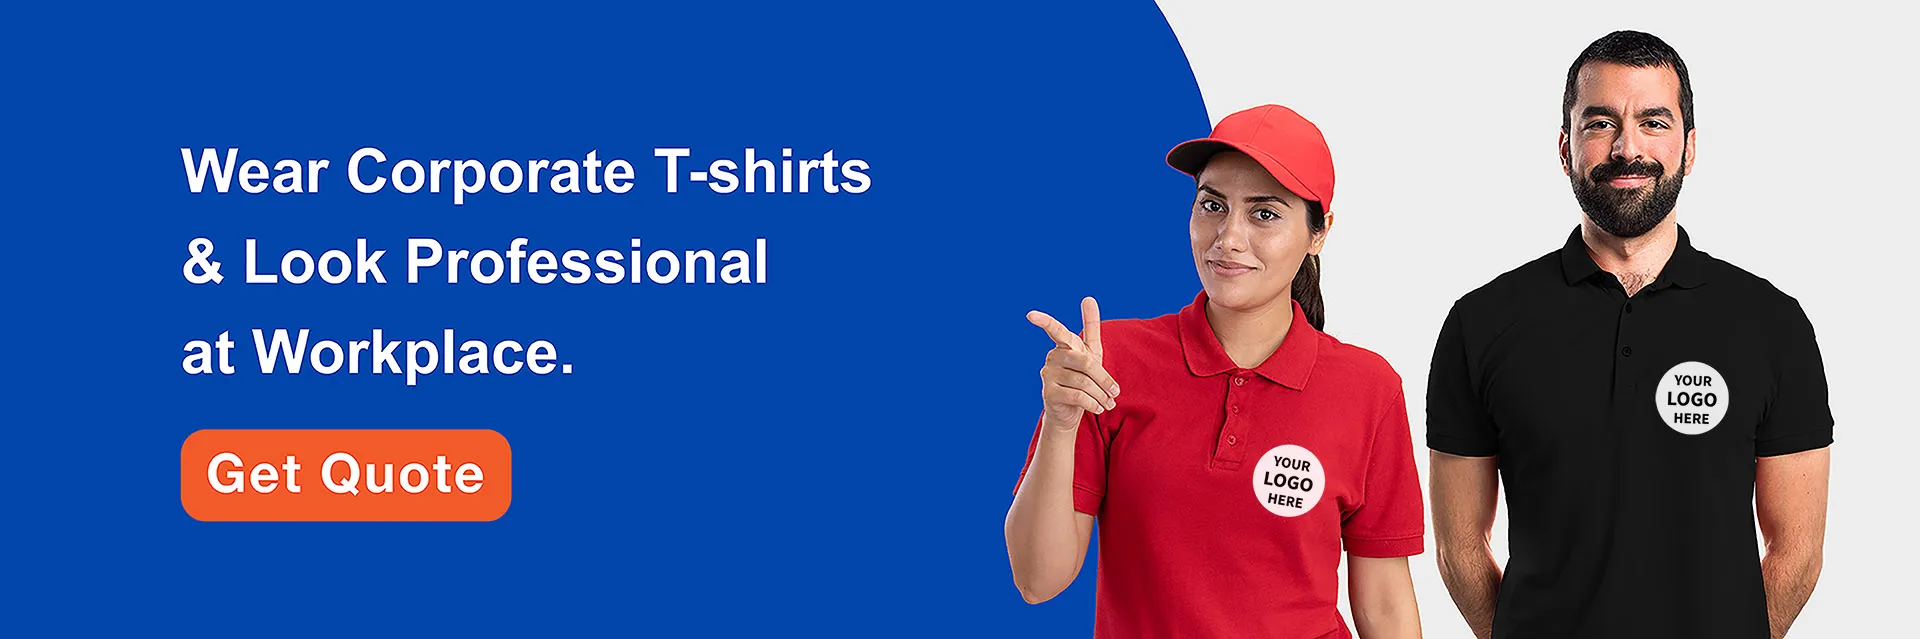 corporate t shirt manufacturers in pondicherry genderless uniforms for companies restaurant hotels and industries